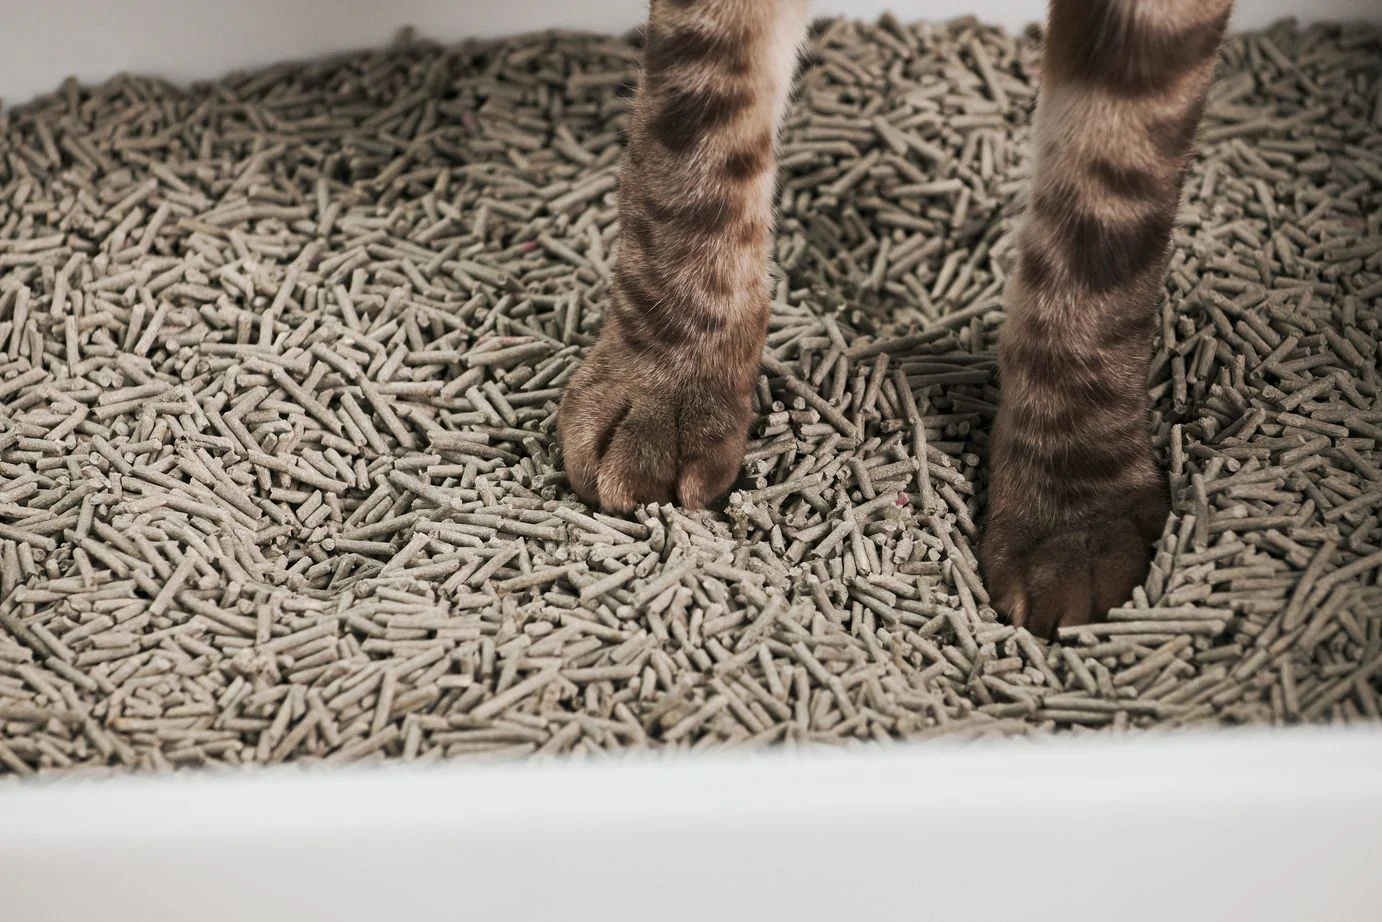 how to switch your cat to a new litter Bentonite cat litter